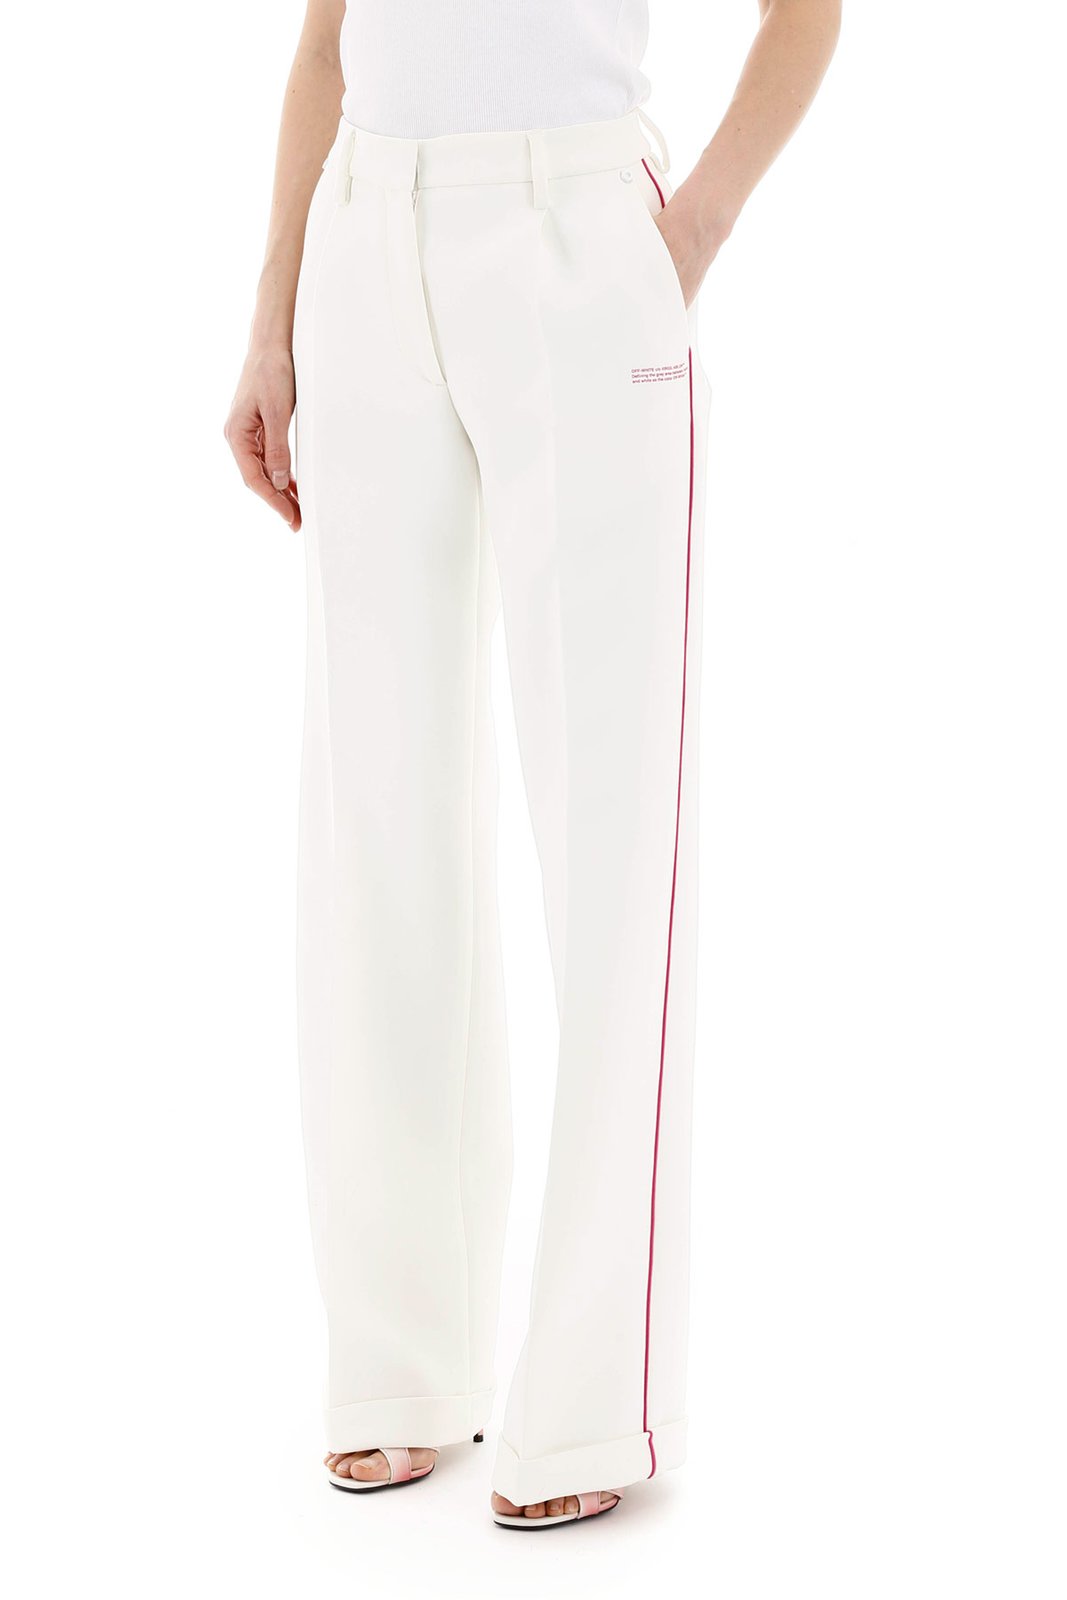 Off-White Contrasting Trim Trousers